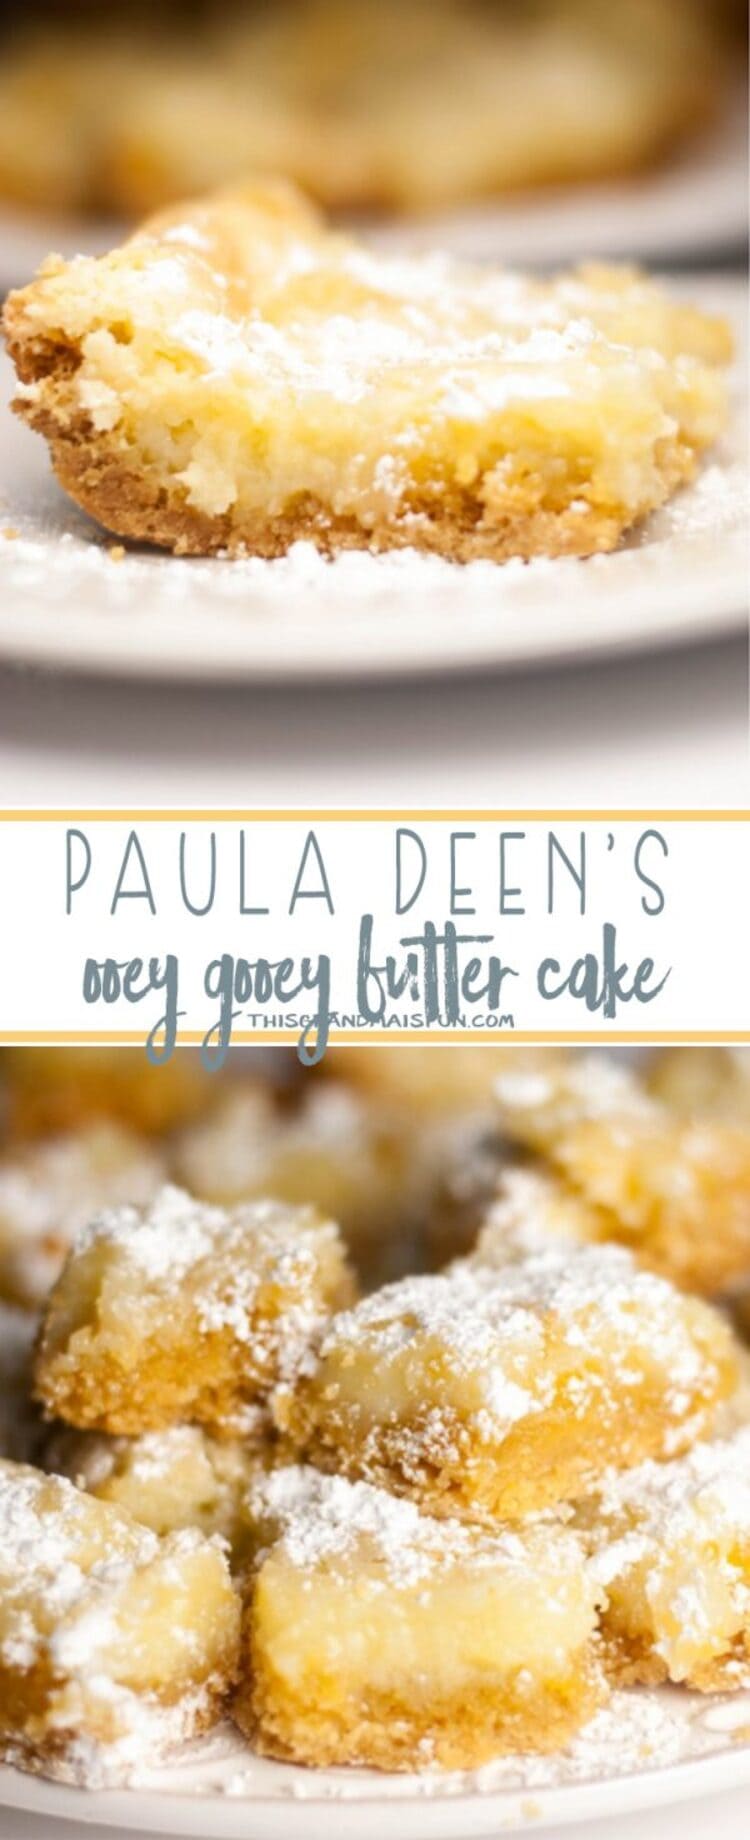 Paula Deen's official recipe for her Ooey Gooey Butter Cake - a pinterest collage with a close up photo of one and multiple pieces of the cake